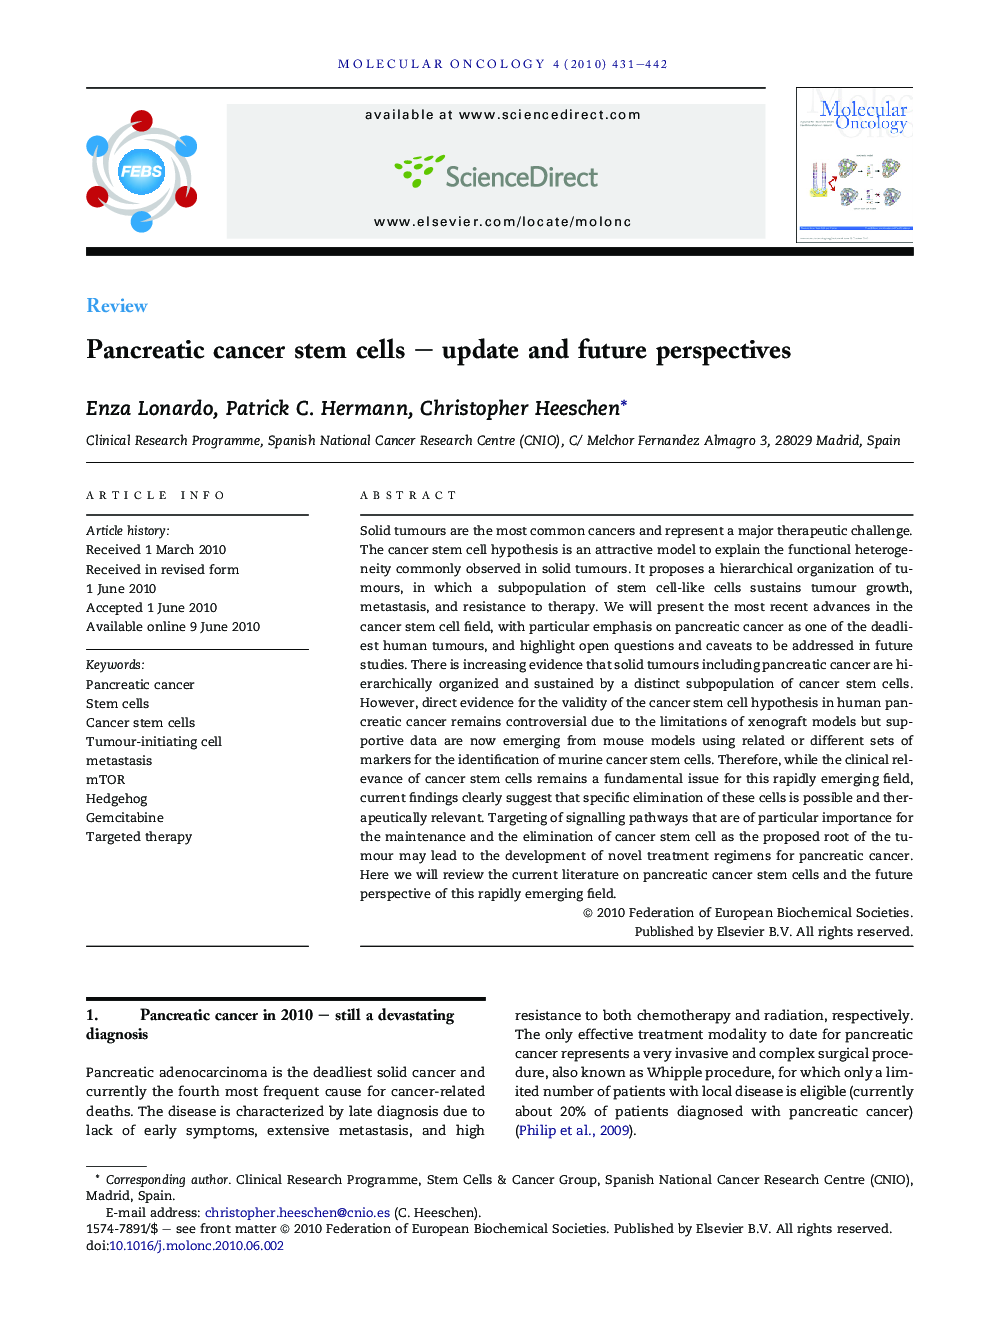 Pancreatic cancer stem cells – update and future perspectives